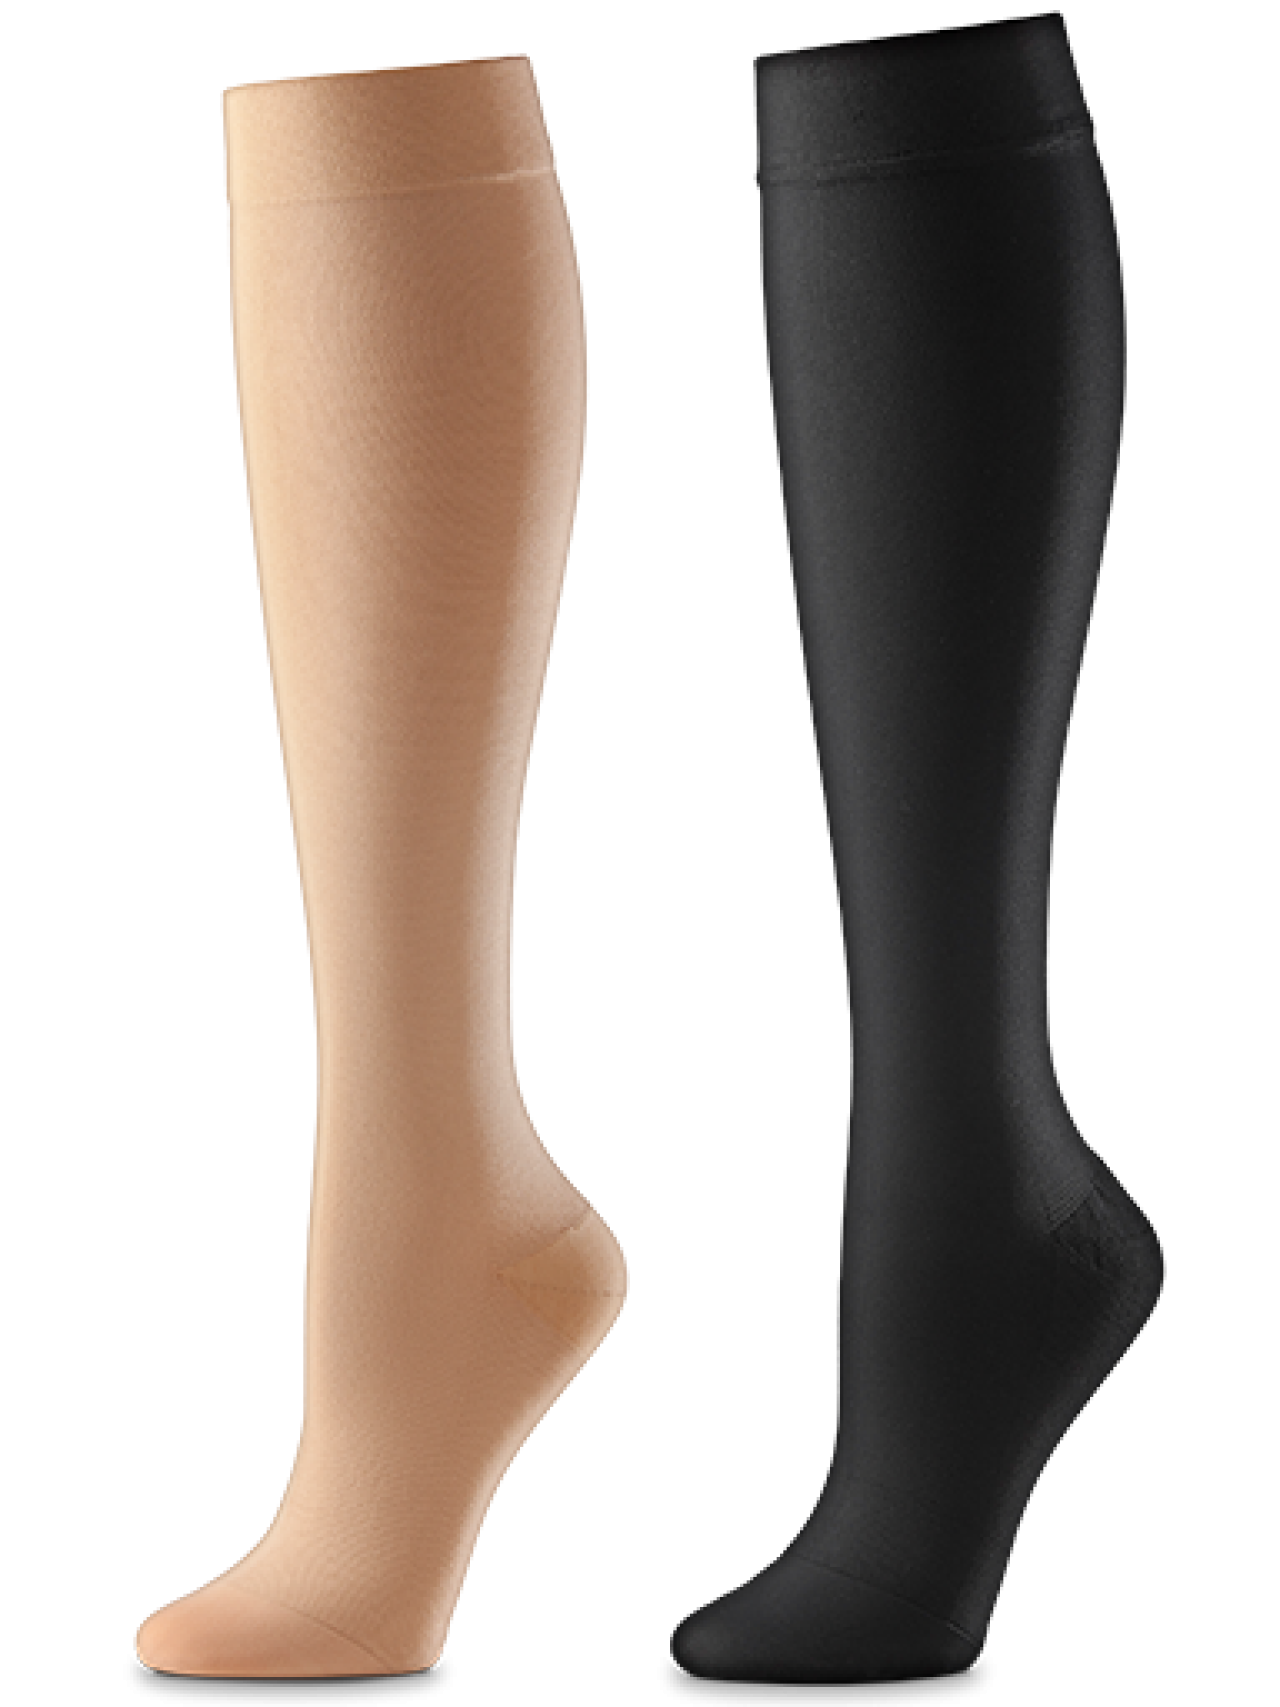 Made to Measure Compression Garments | L&R Medical